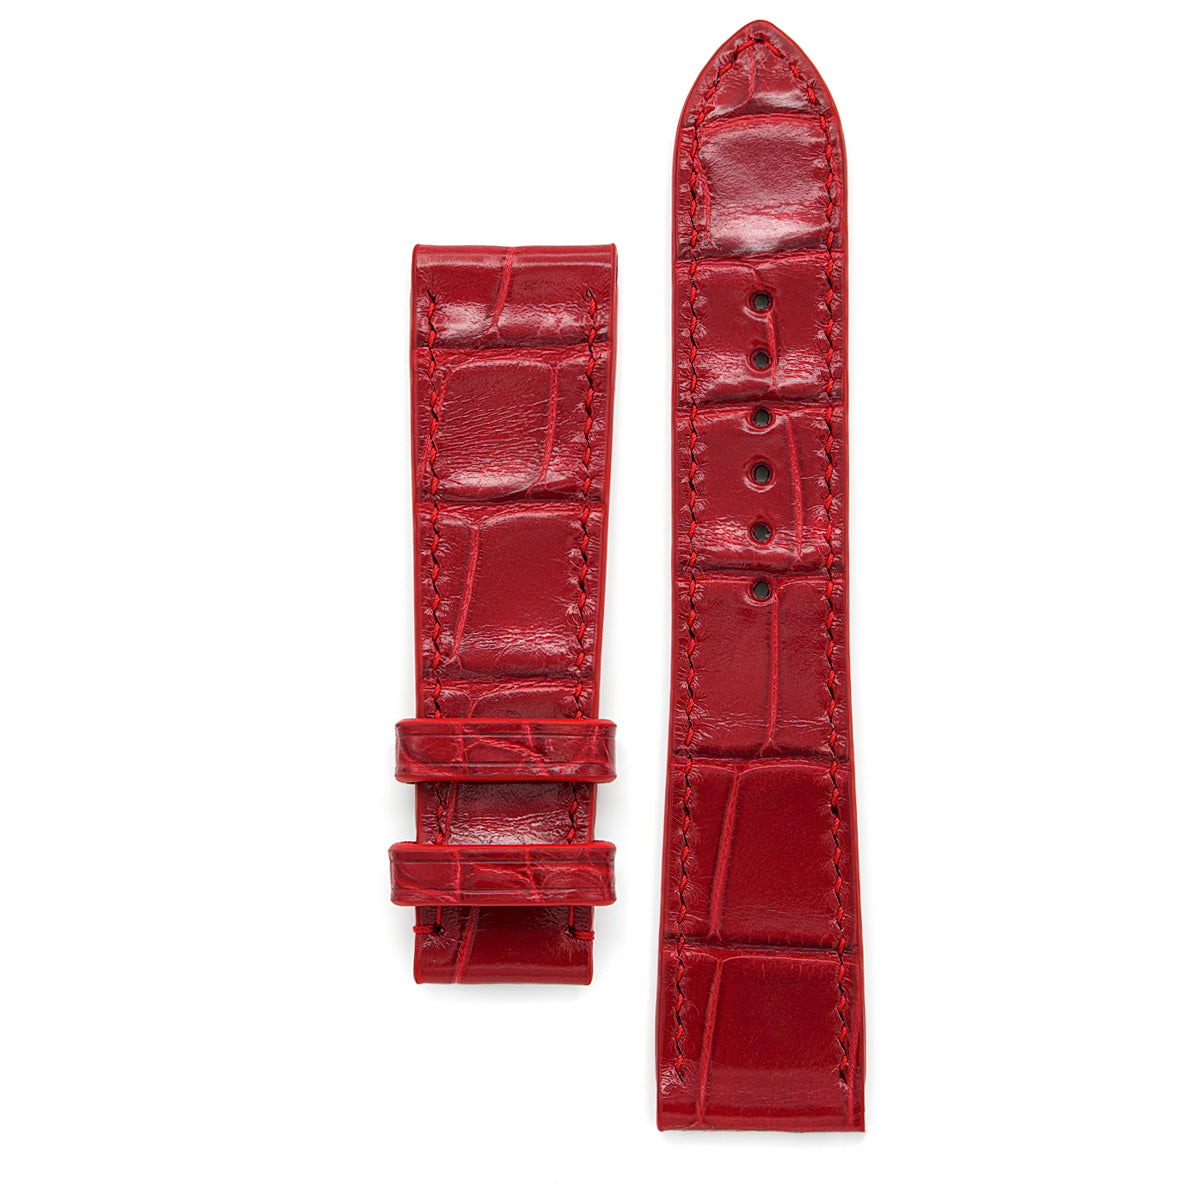 Glossy Red Square Scales Alligator Leather Watch Strap, Hand Stitched